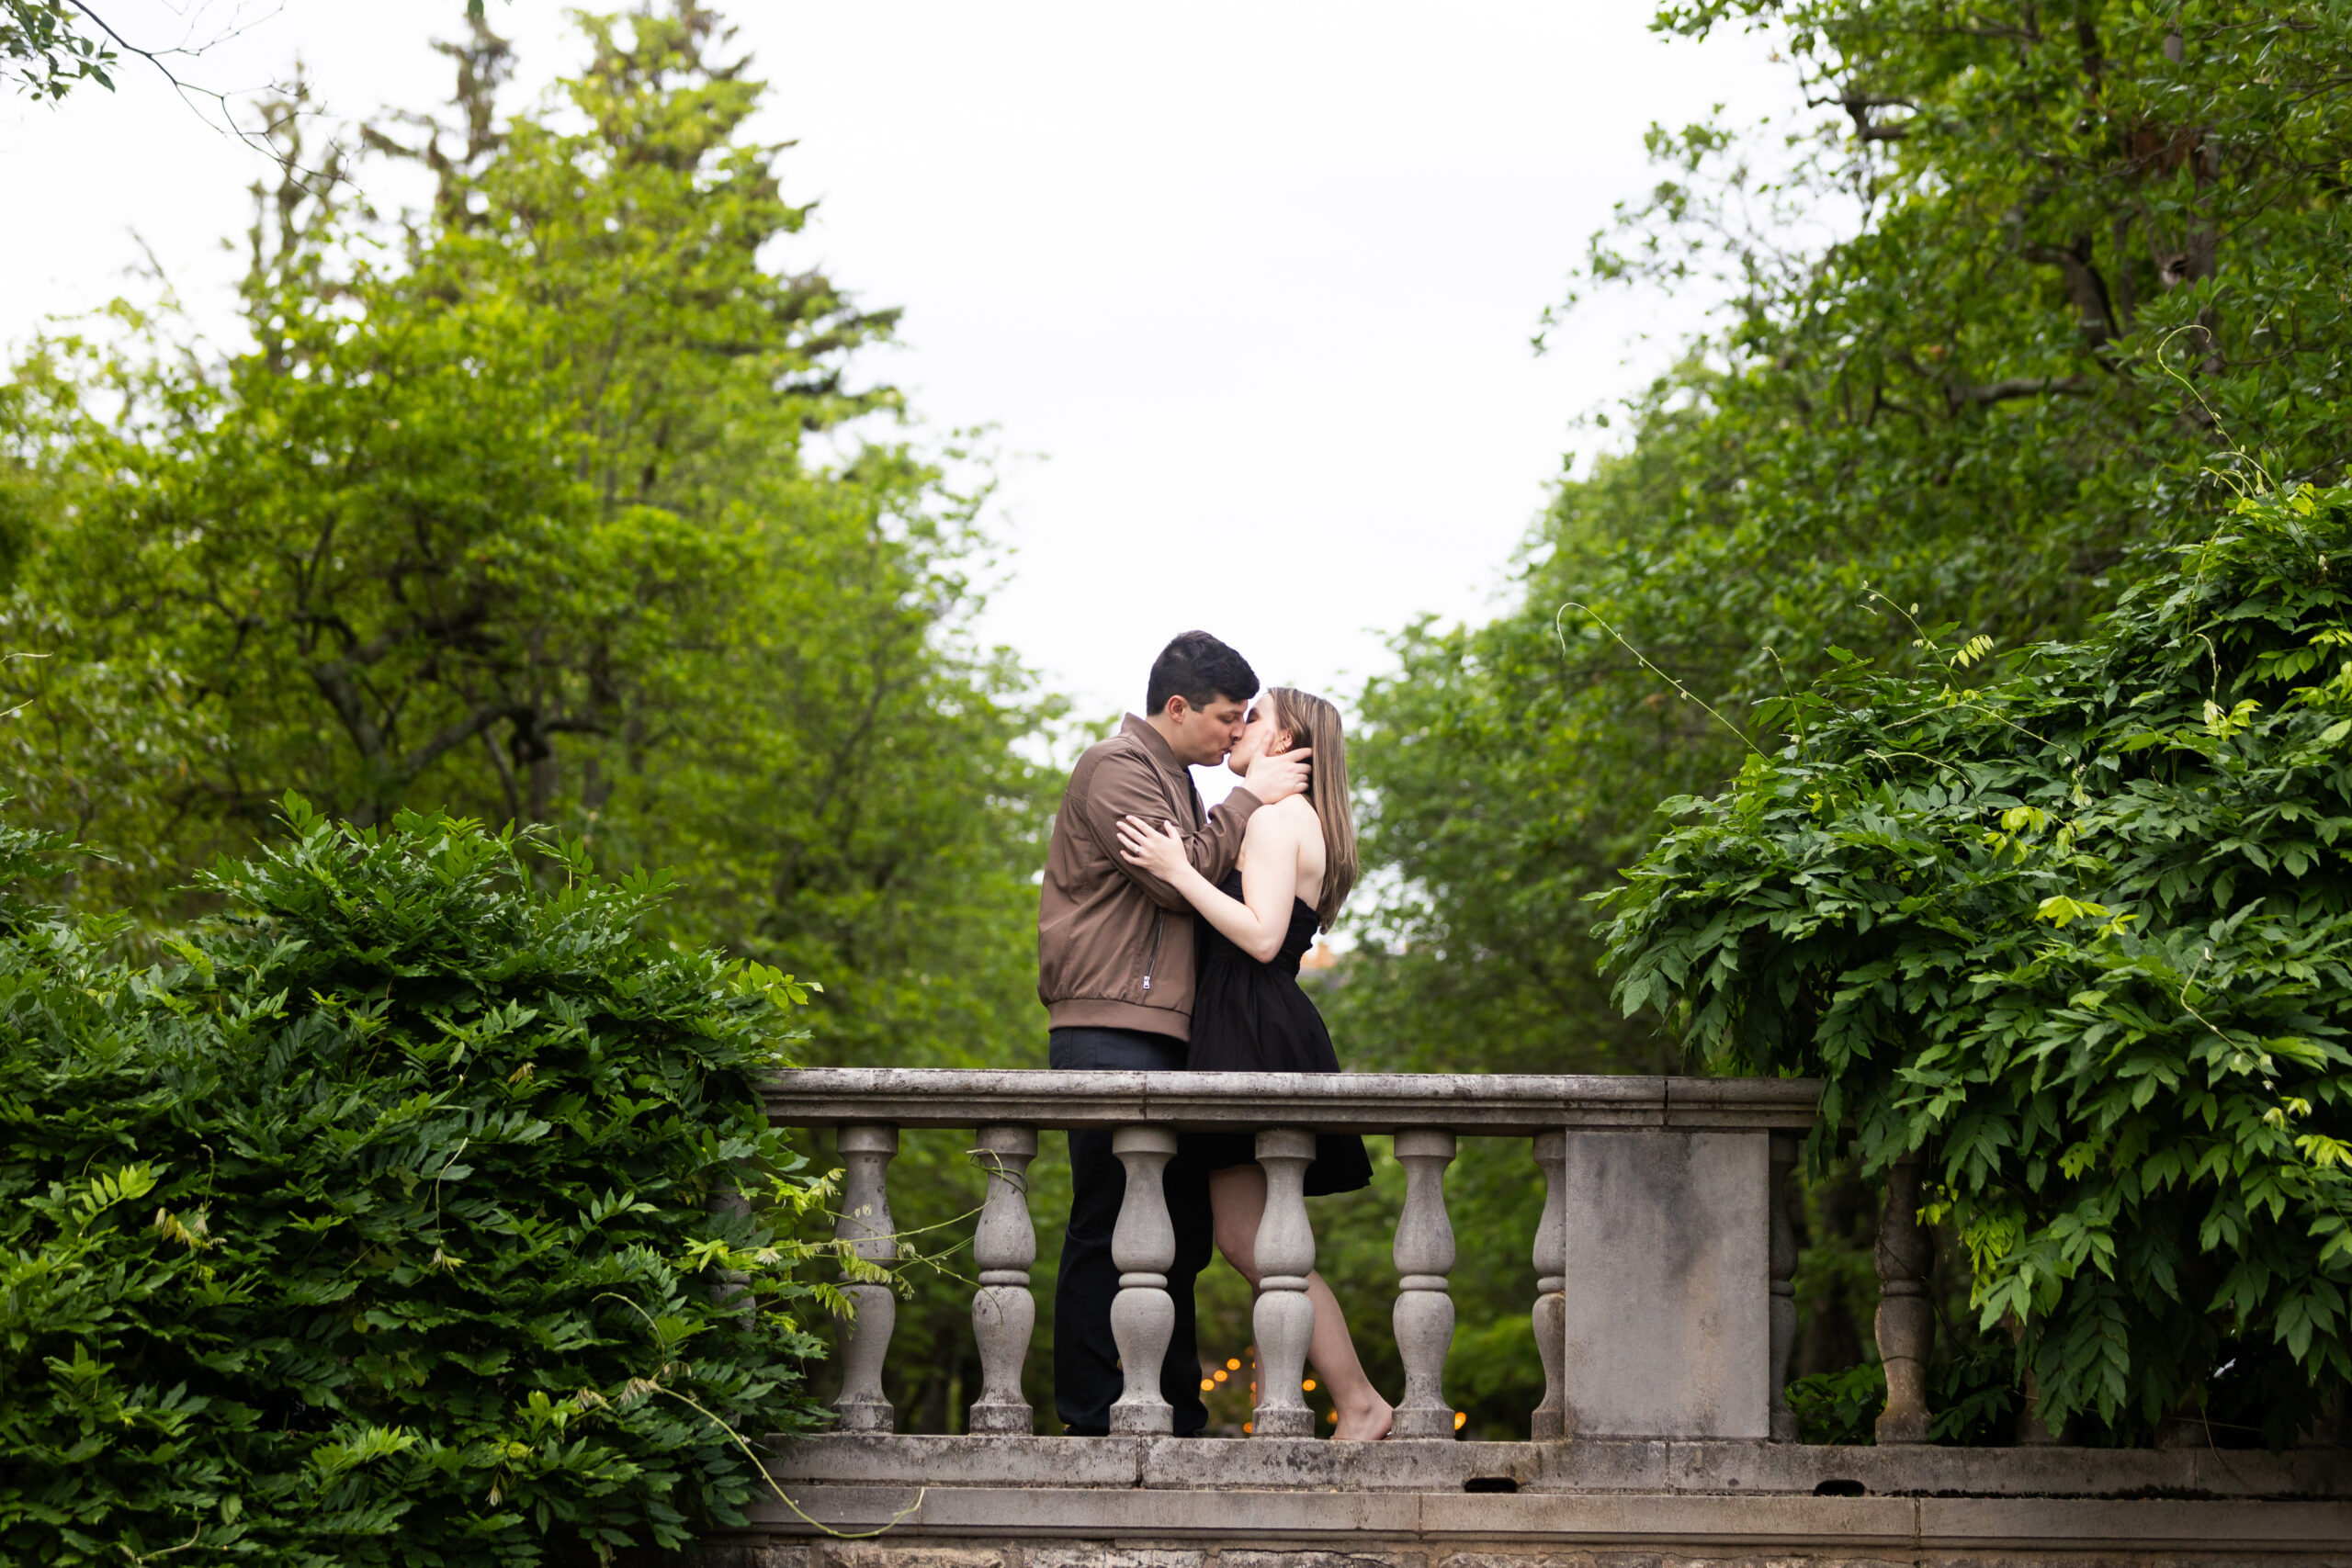 A couple captured by New Jersey Wedding Photographer Jarot Bocanegra kissing on a bridge in a park.